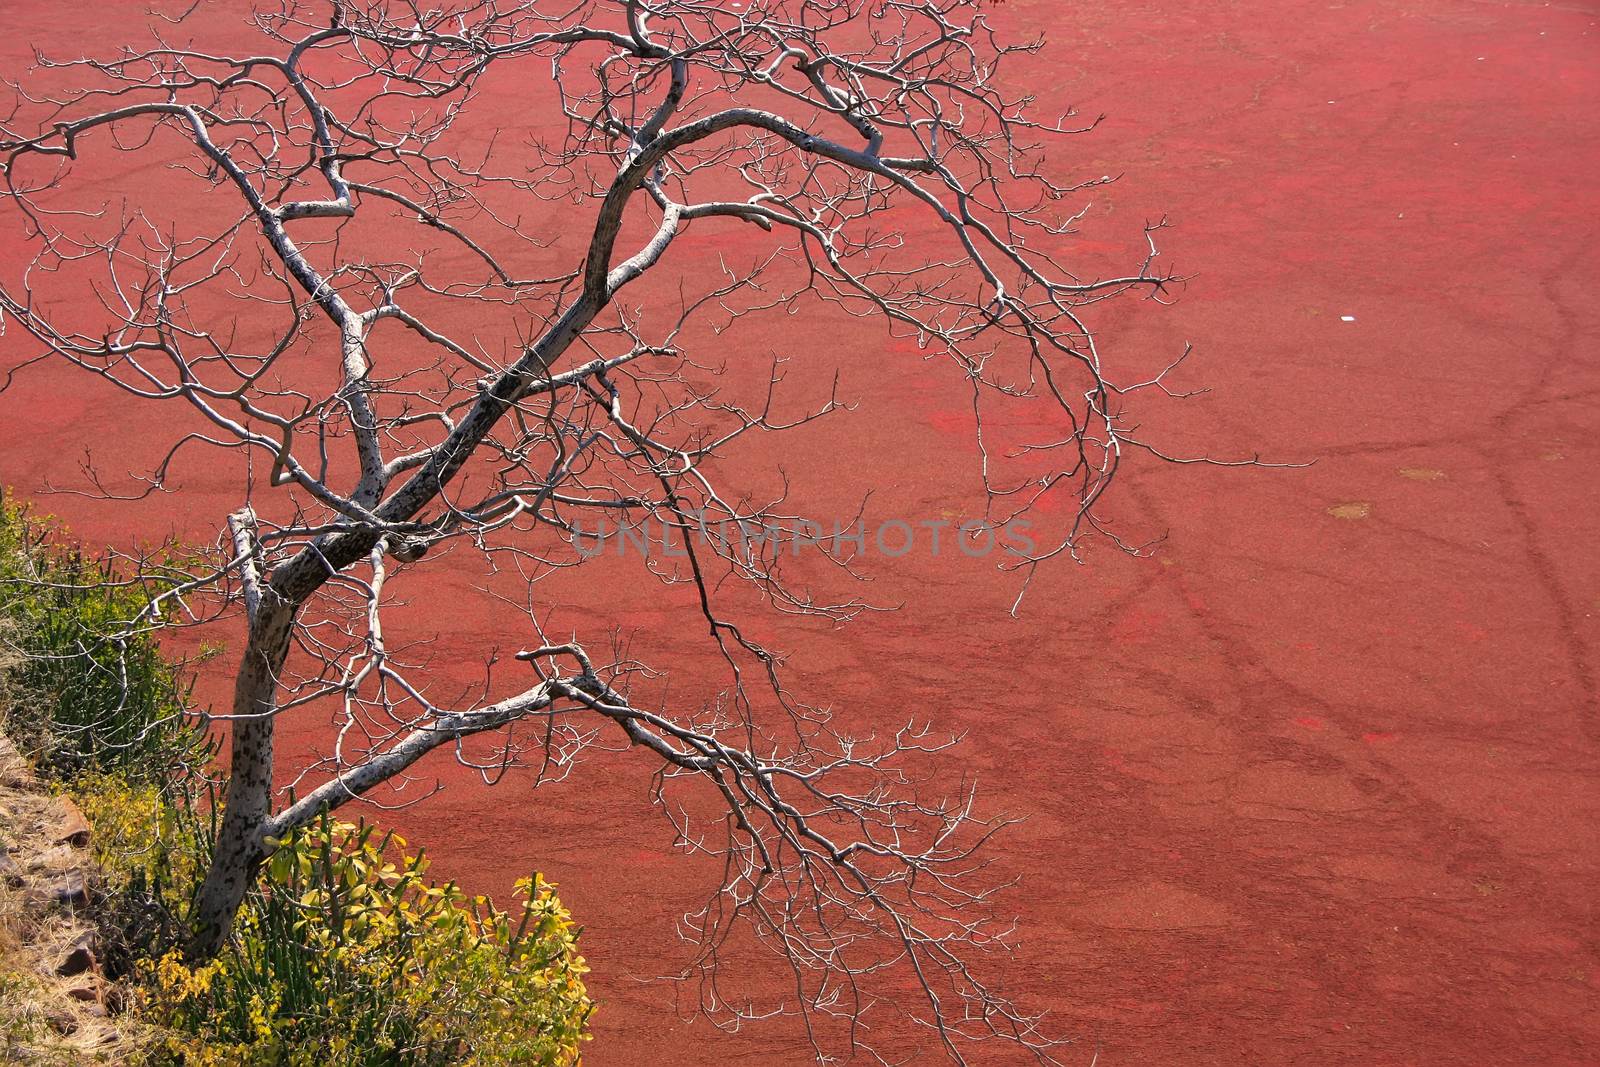 Tree without leaves against red pond, Ranthambore Fort, India by donya_nedomam